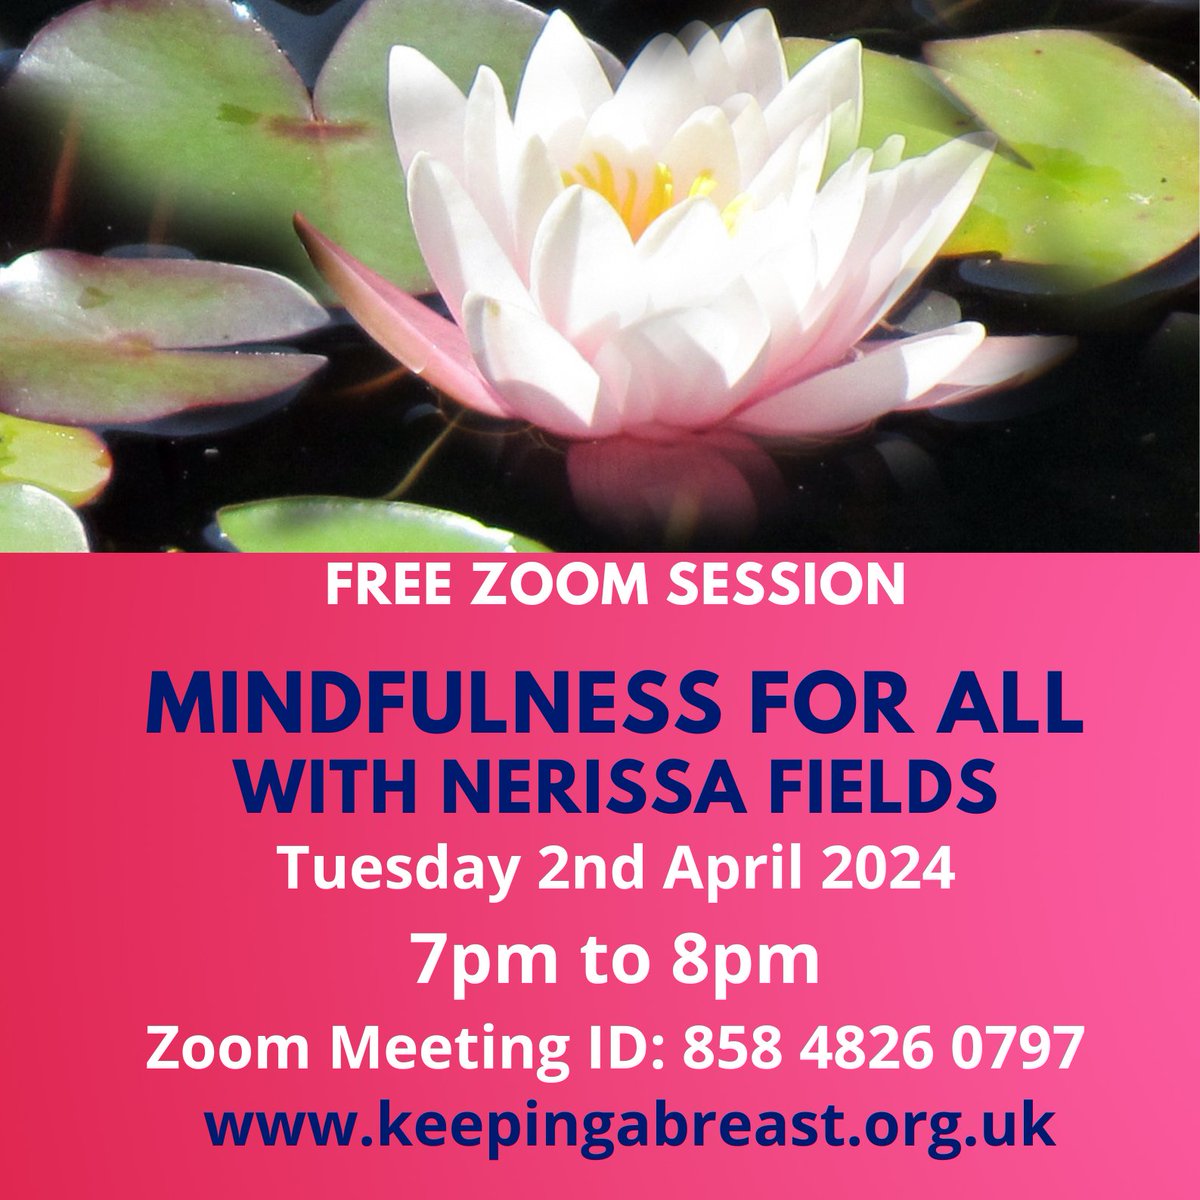 Feeling anxious or stressed? Join us for the free Mindfulness For All session on Zoom this evening Tuesday 2nd April open to everyone connected with Keeping Abreast in any way. From 7pm to 8pm Zoom Meeting Code 858 4826 0797. All welcome! #mindfulness #breastreconstructionsupport